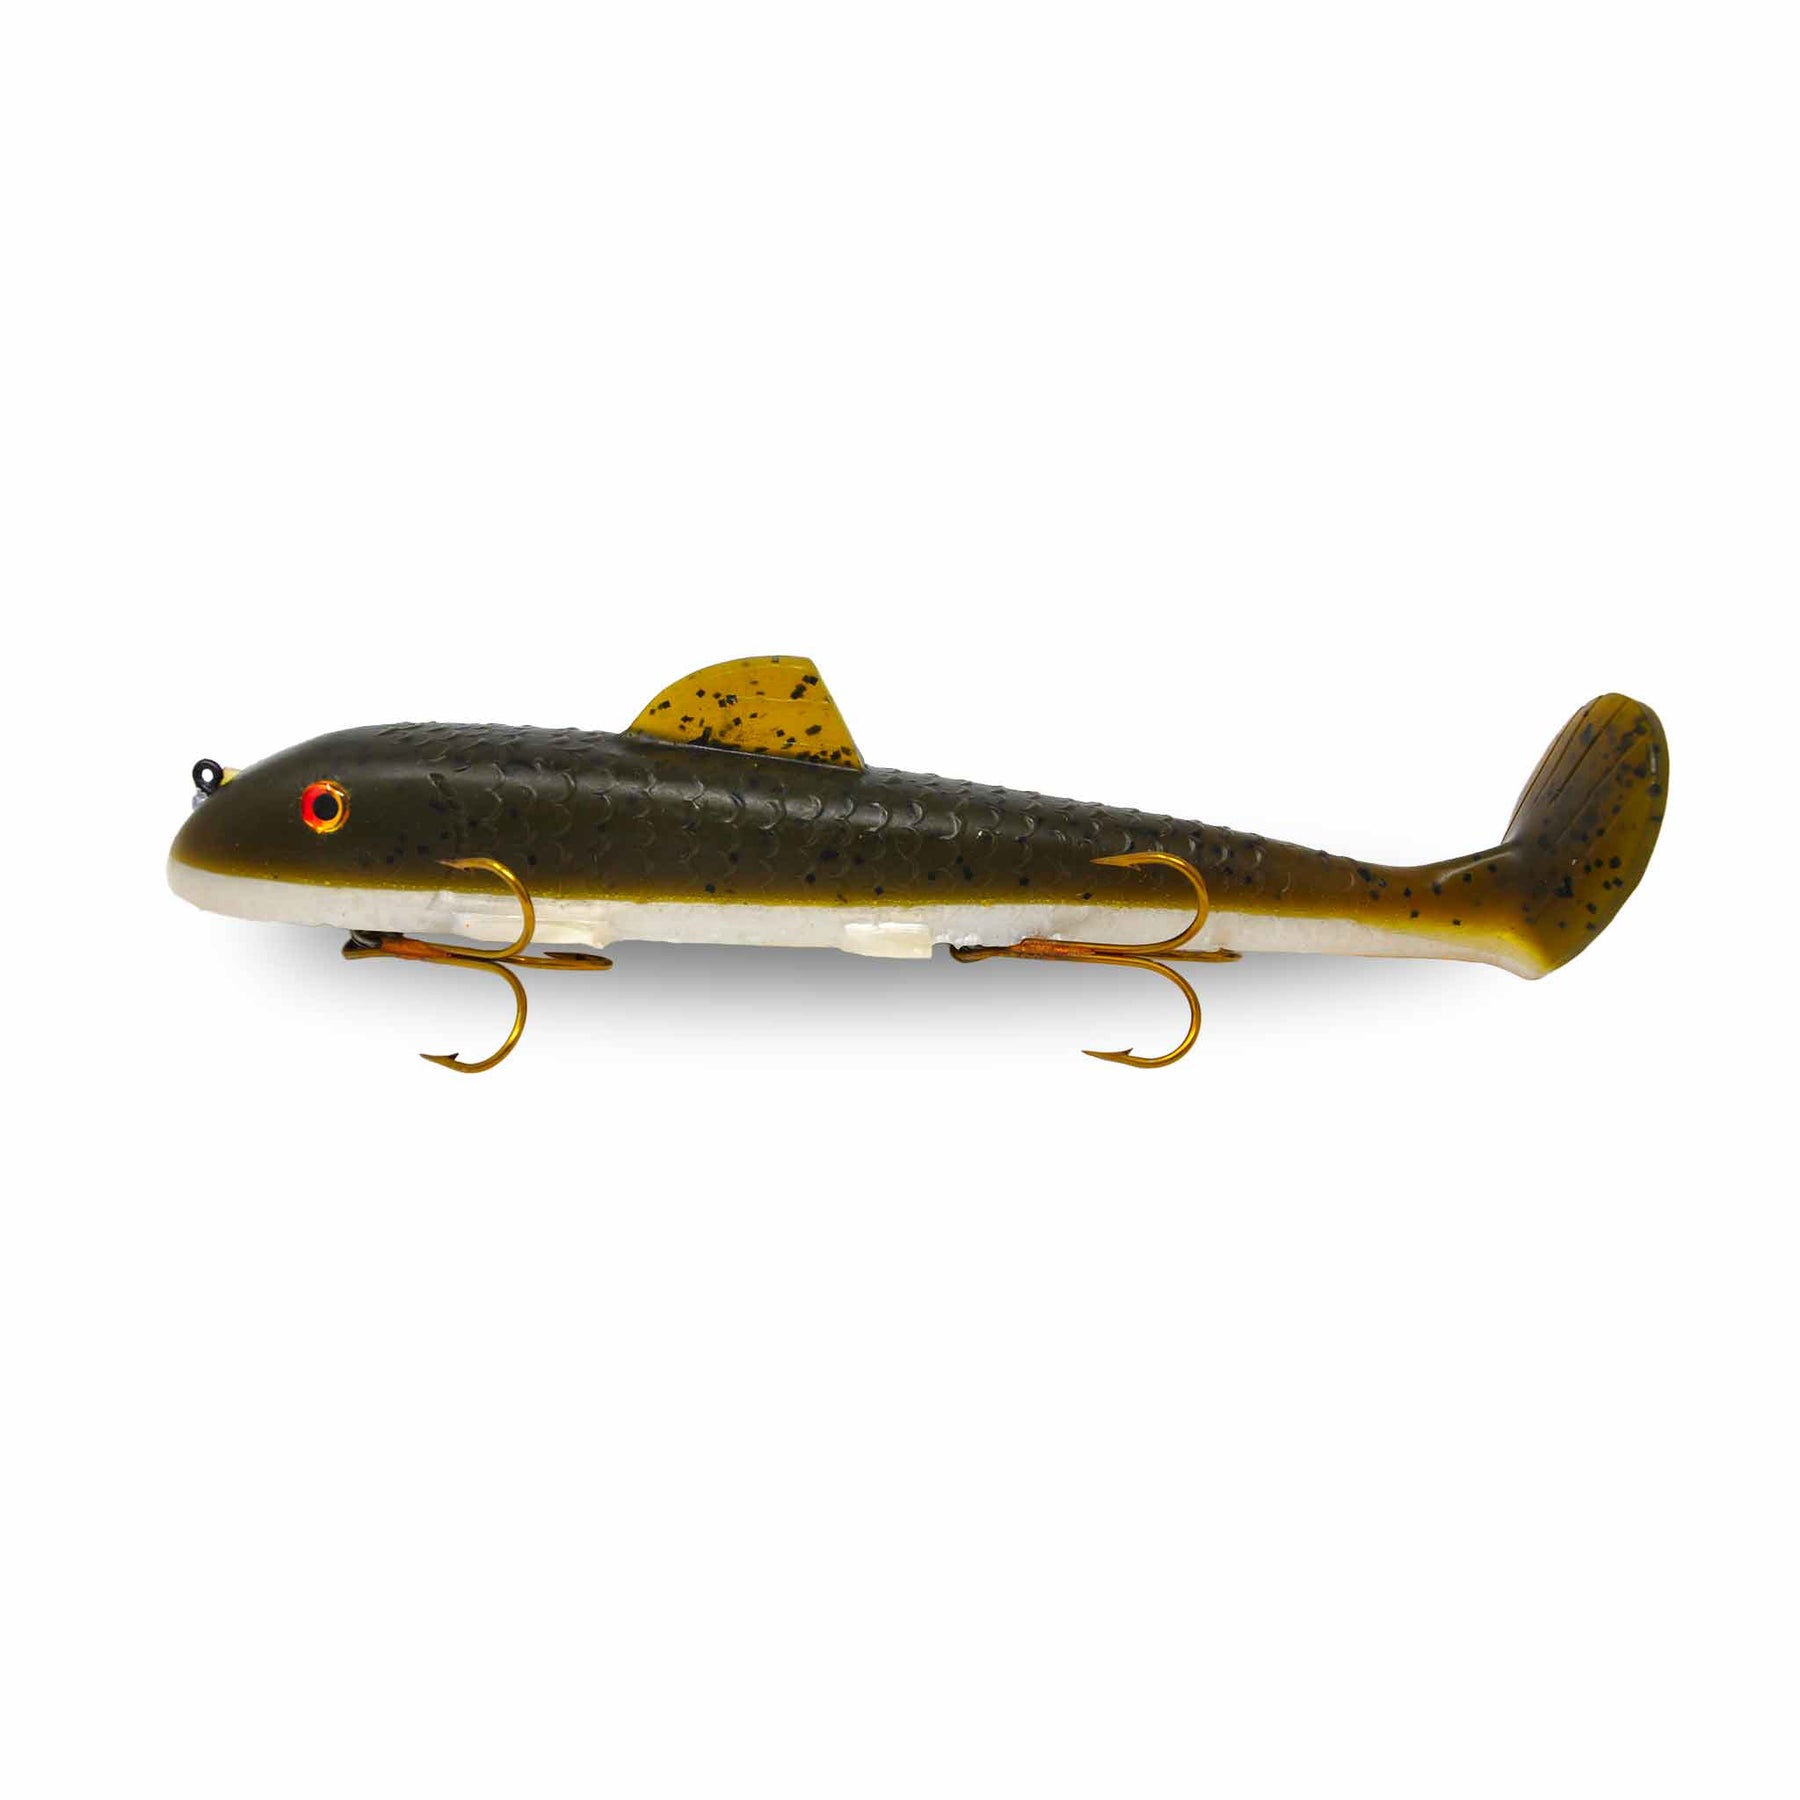 View of Rubber Suick Suzy Sucker 11" Swimbait Light Sucker available at EZOKO Pike and Musky Shop